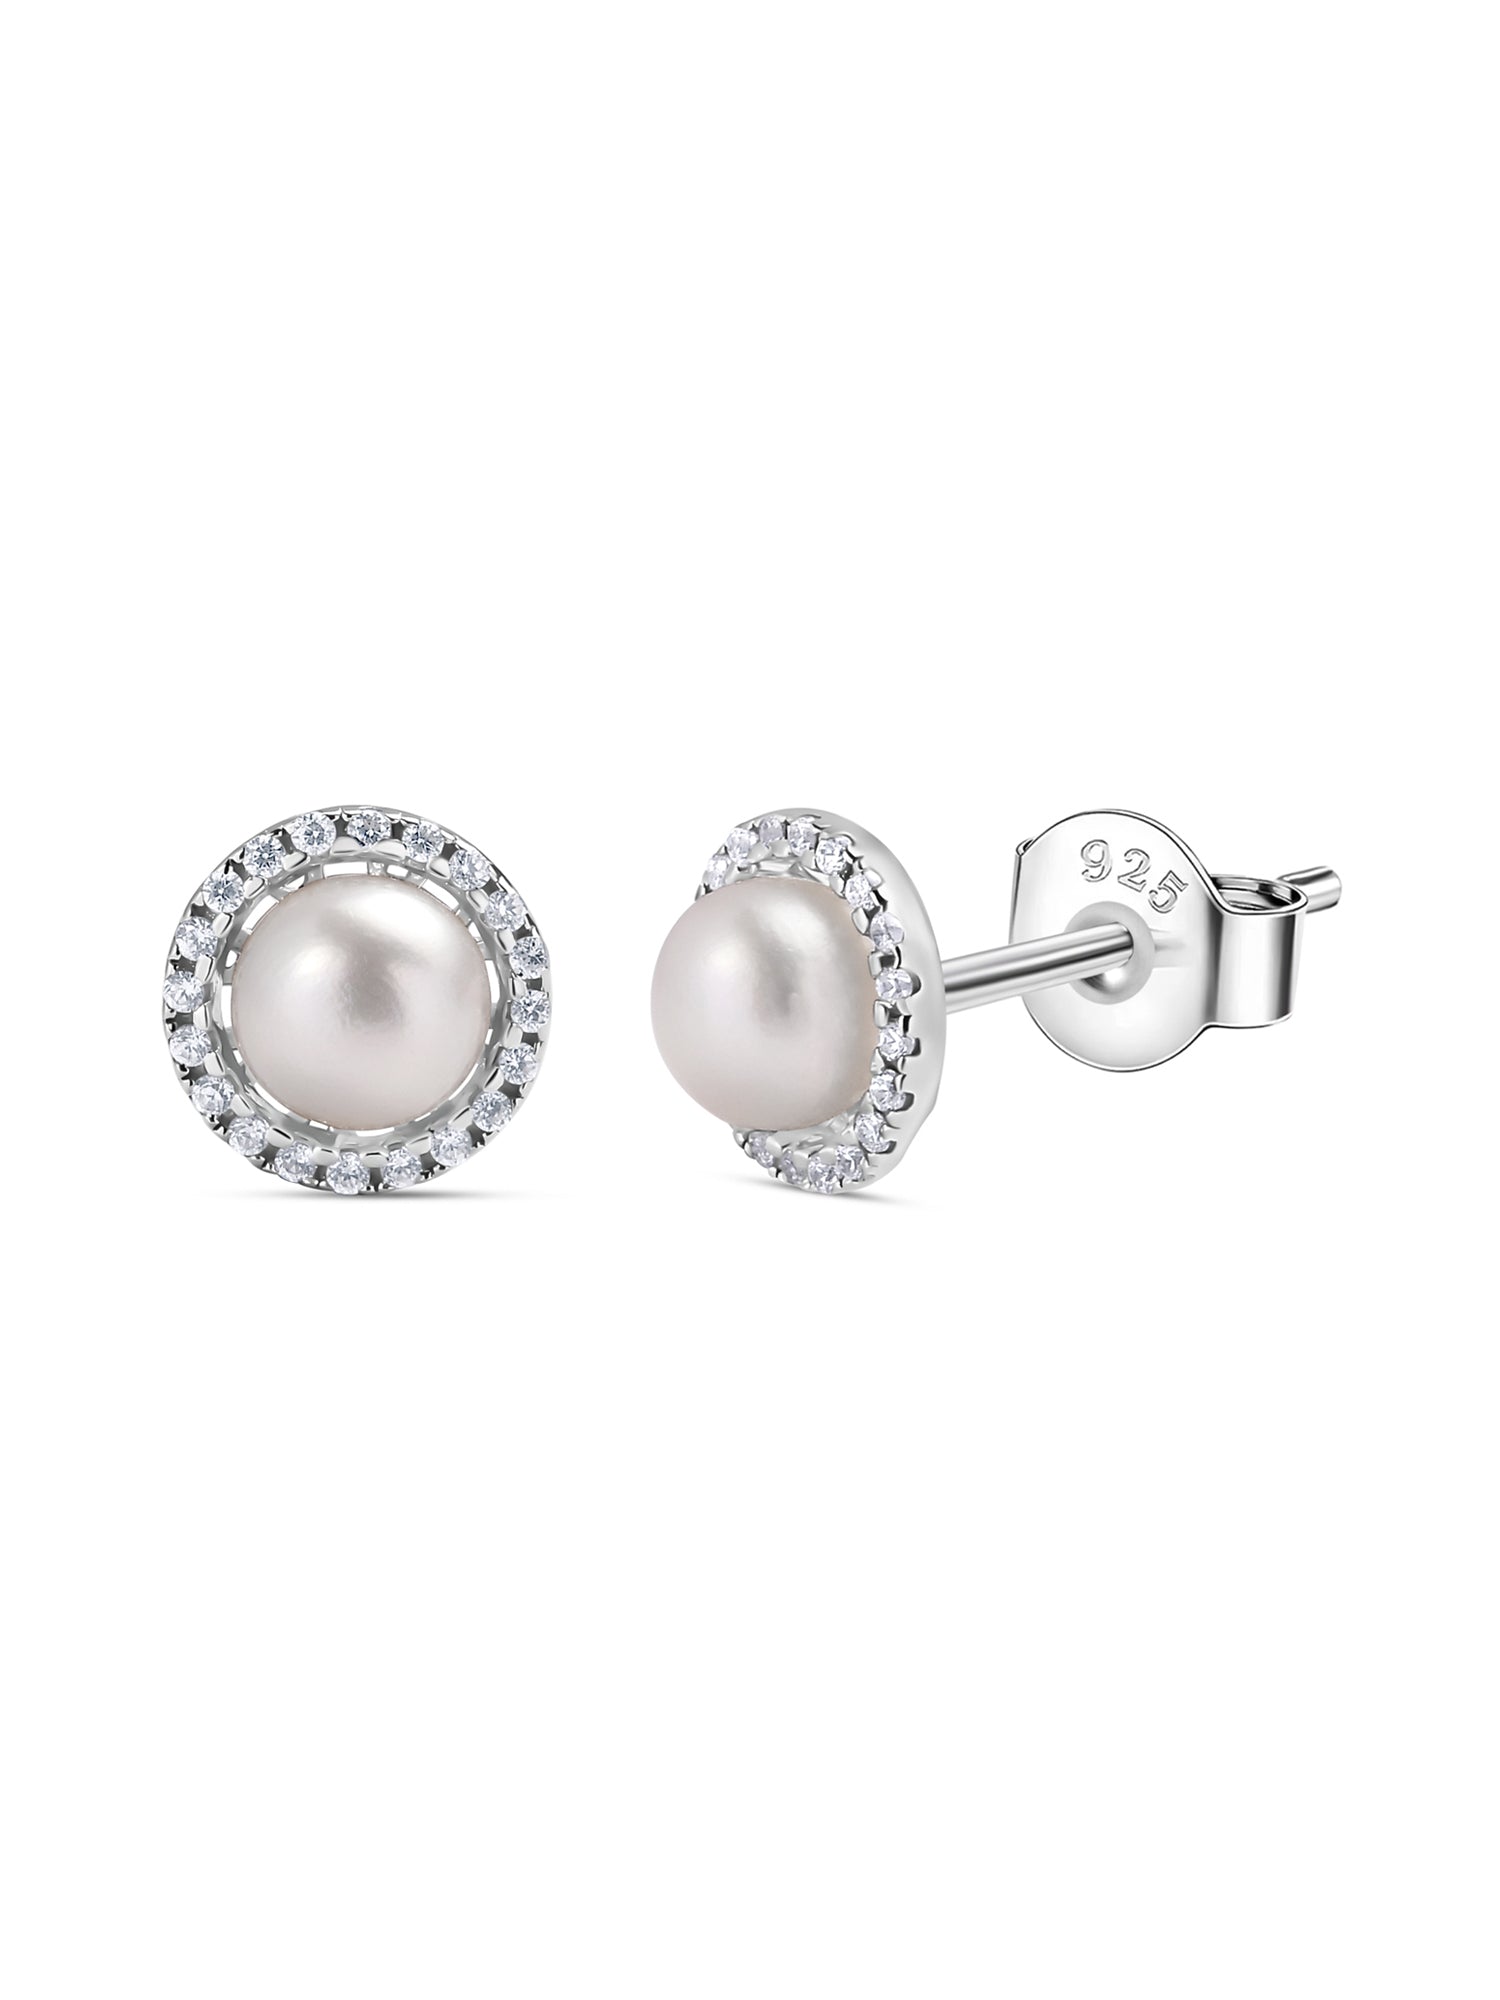 Classic Pearl Stud Earrings For Everyday-1